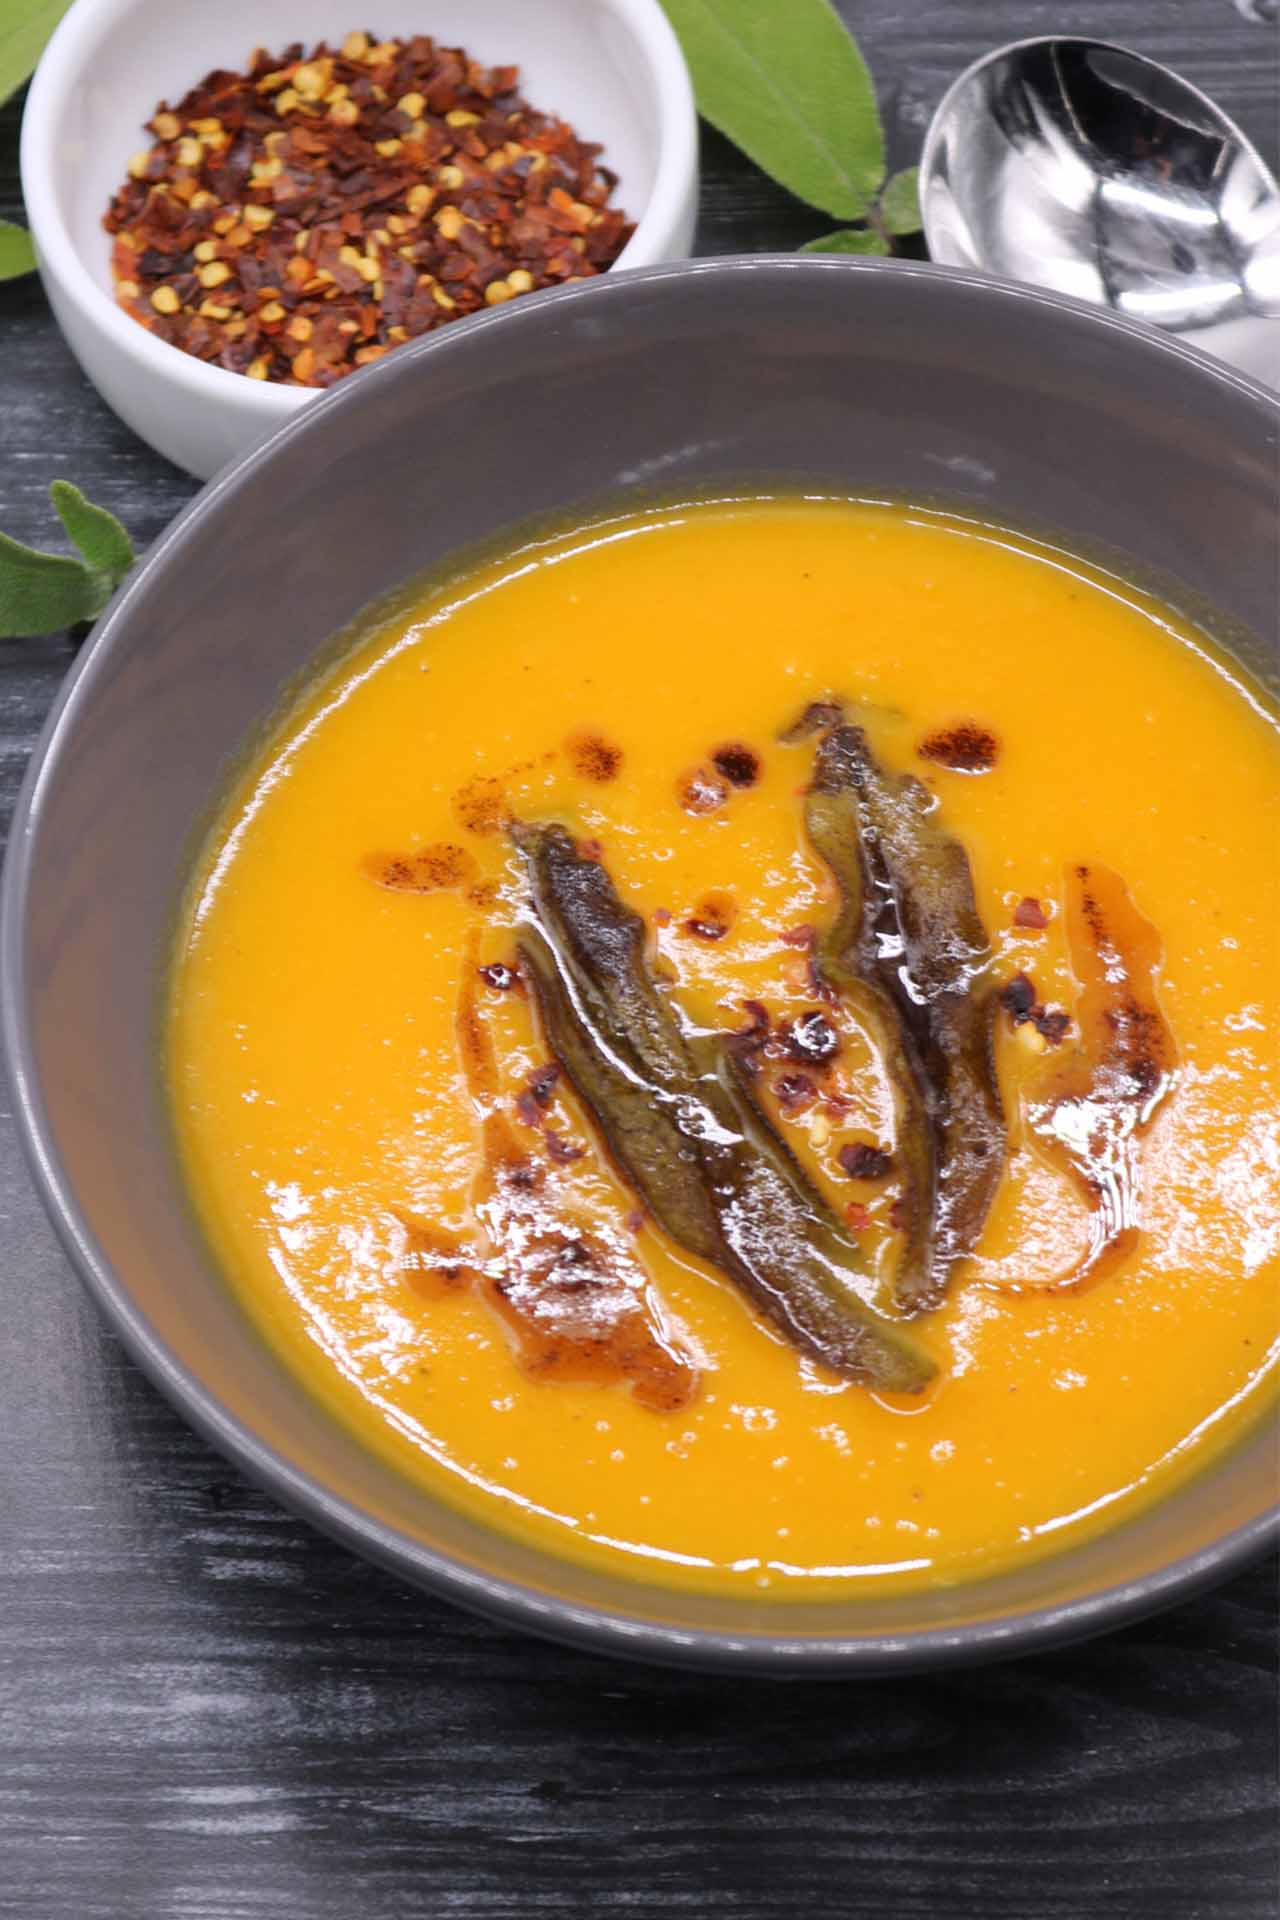 Squash and Carrot Soup with Crispy Sage Leaves, Squash and Carrot Soup with Crispy Sage Leaves